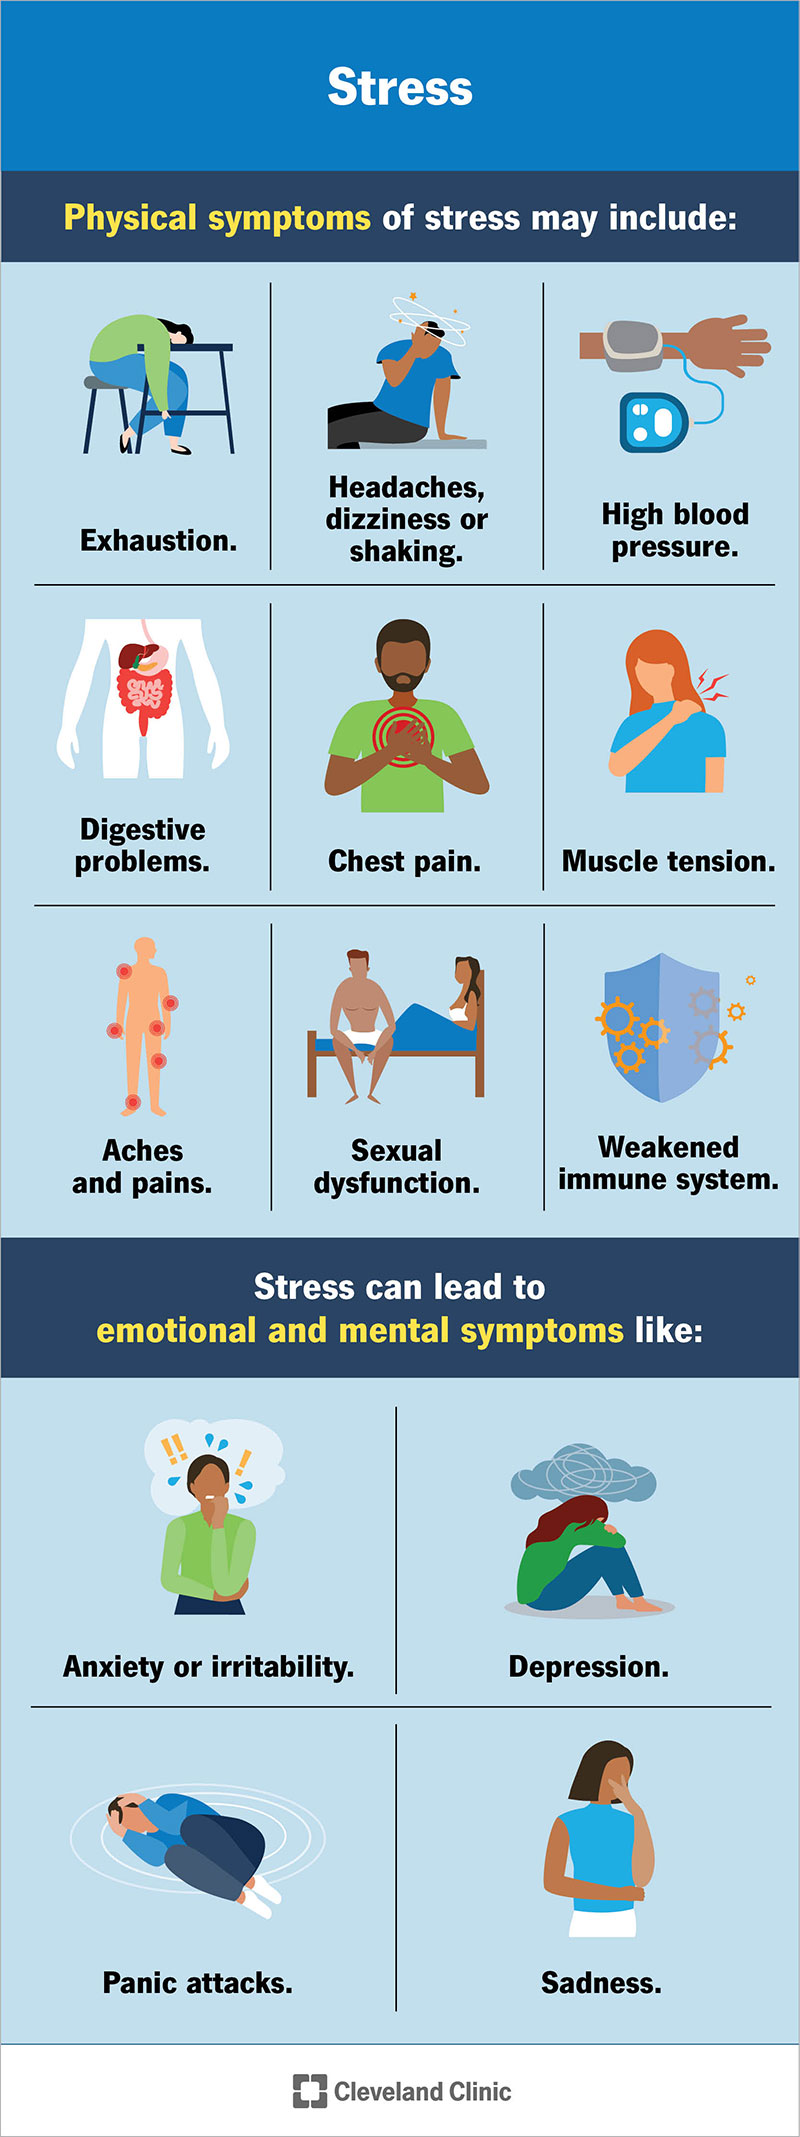 Stress can lead to physical symptoms like exhaustion and chest pain, and psychological symptoms like depression and sadness